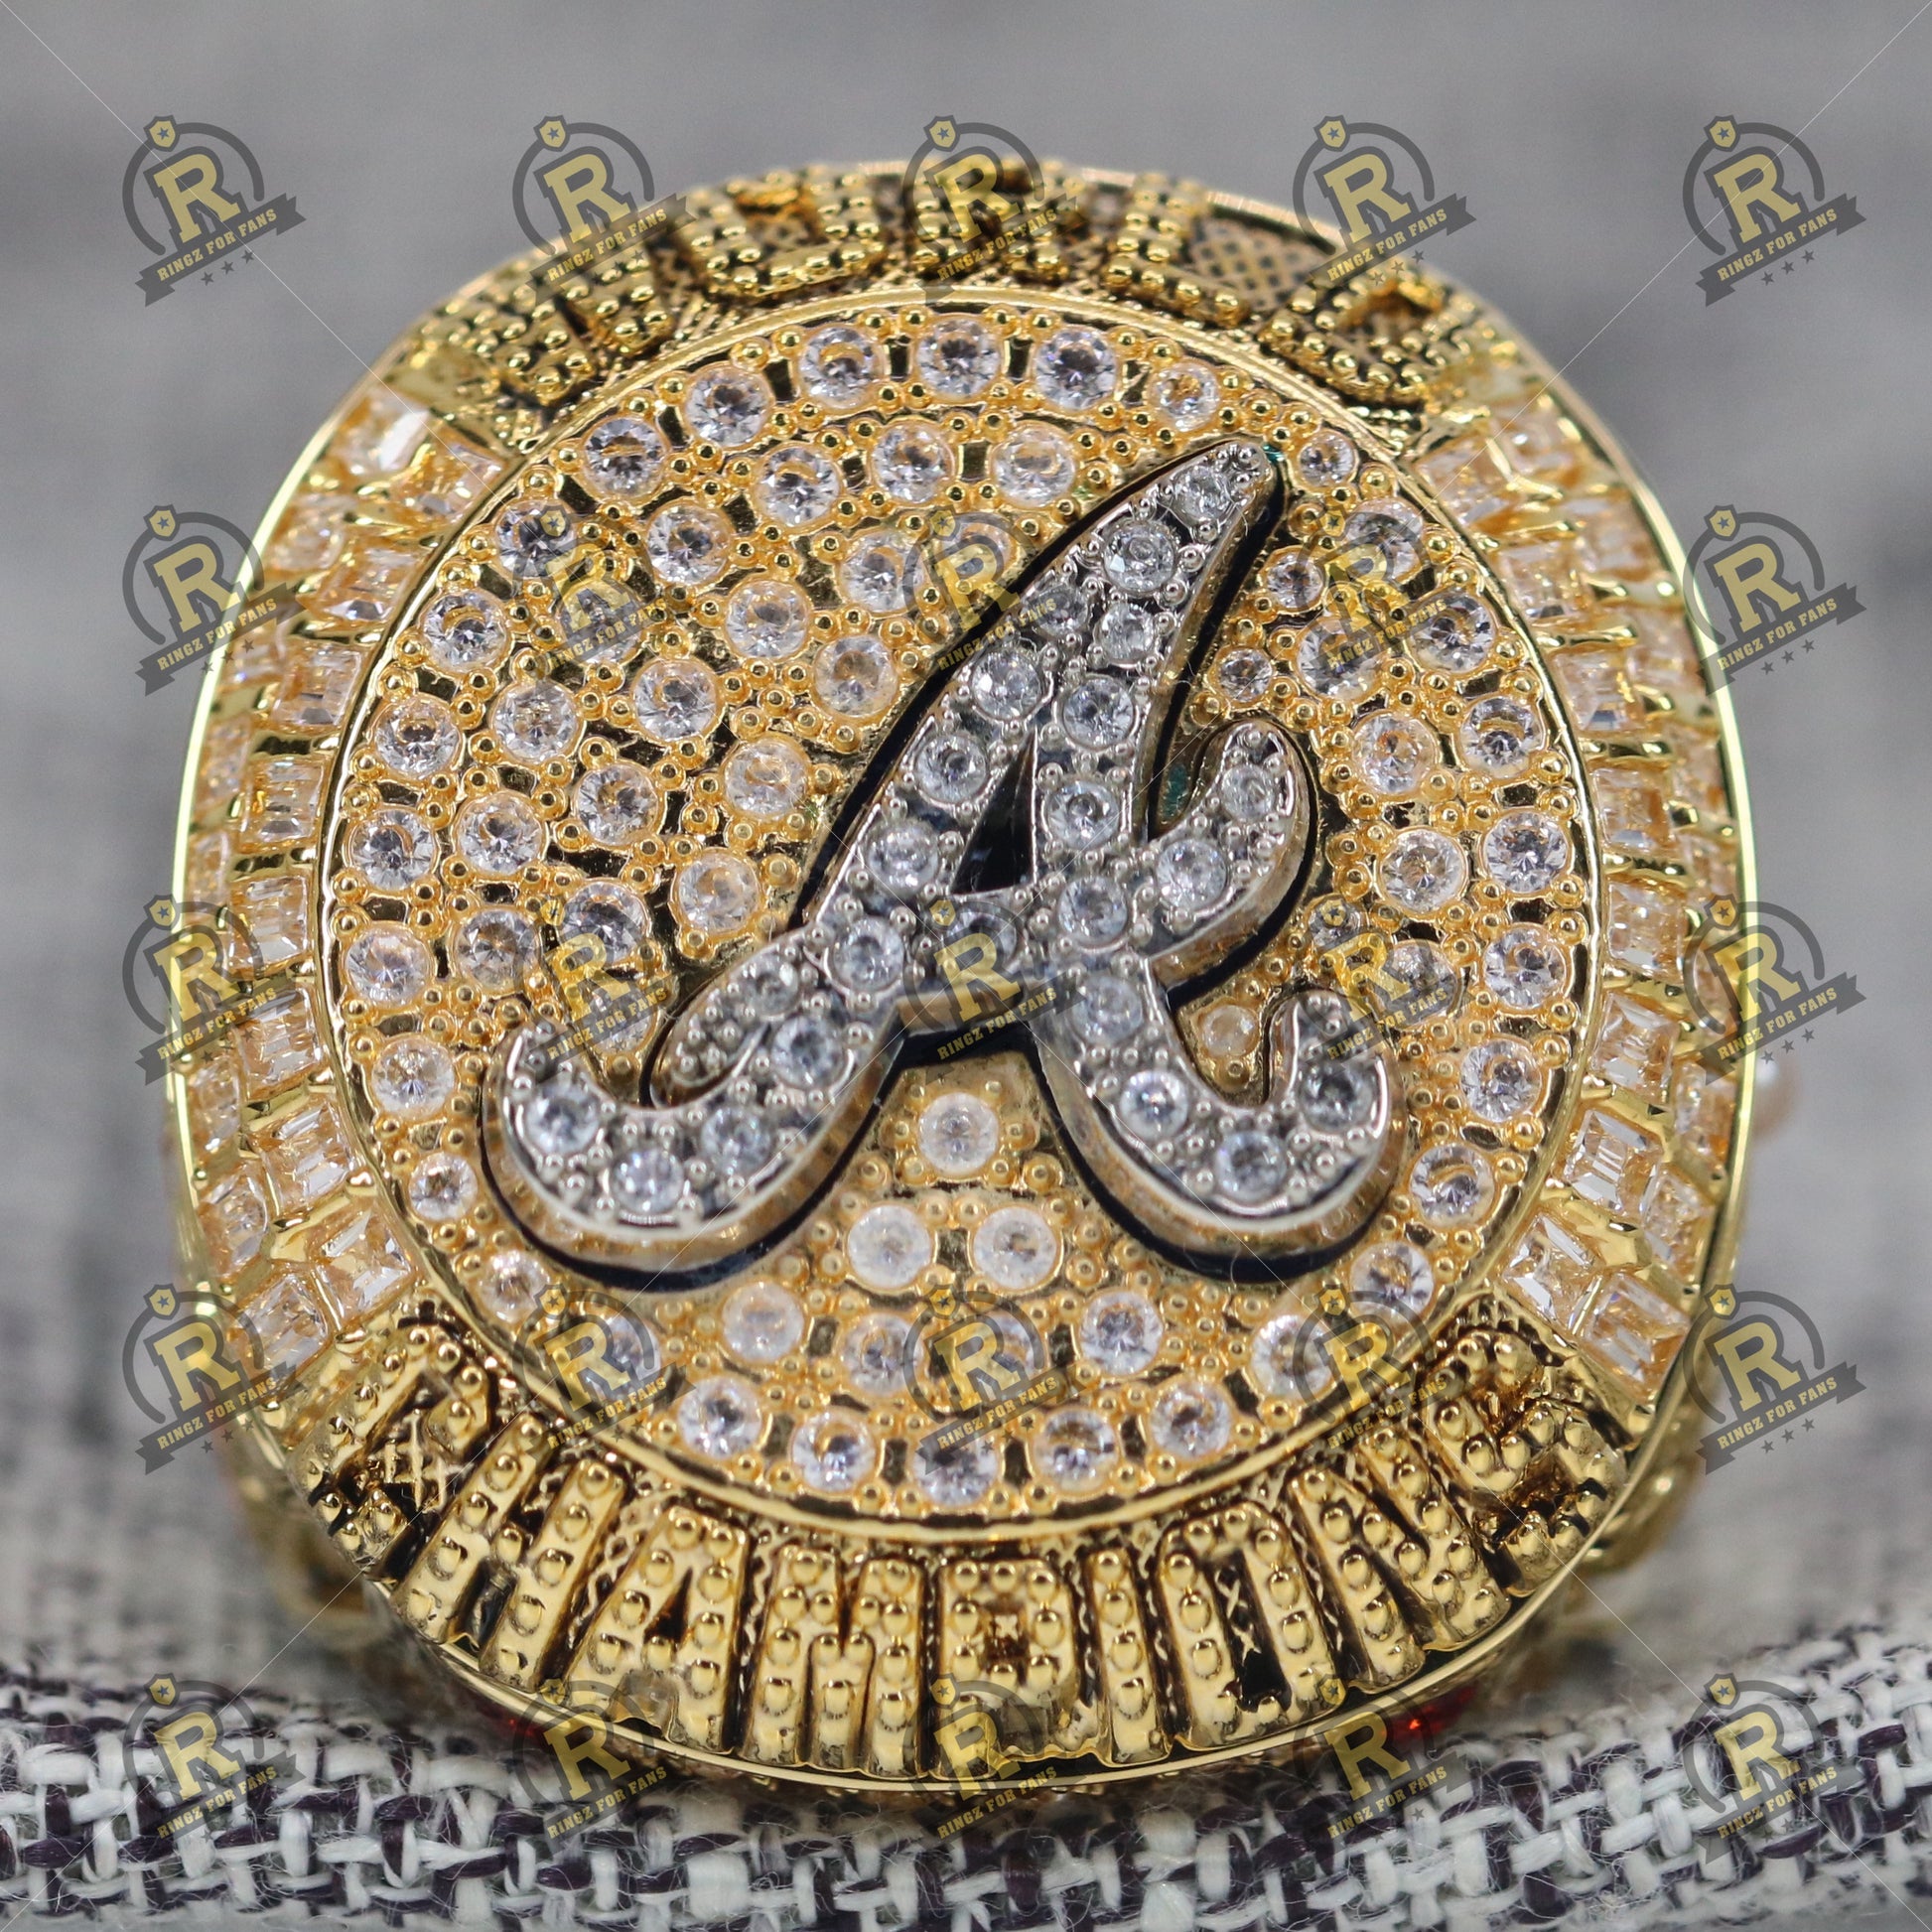 Braves World Series ring pictures what does it look like